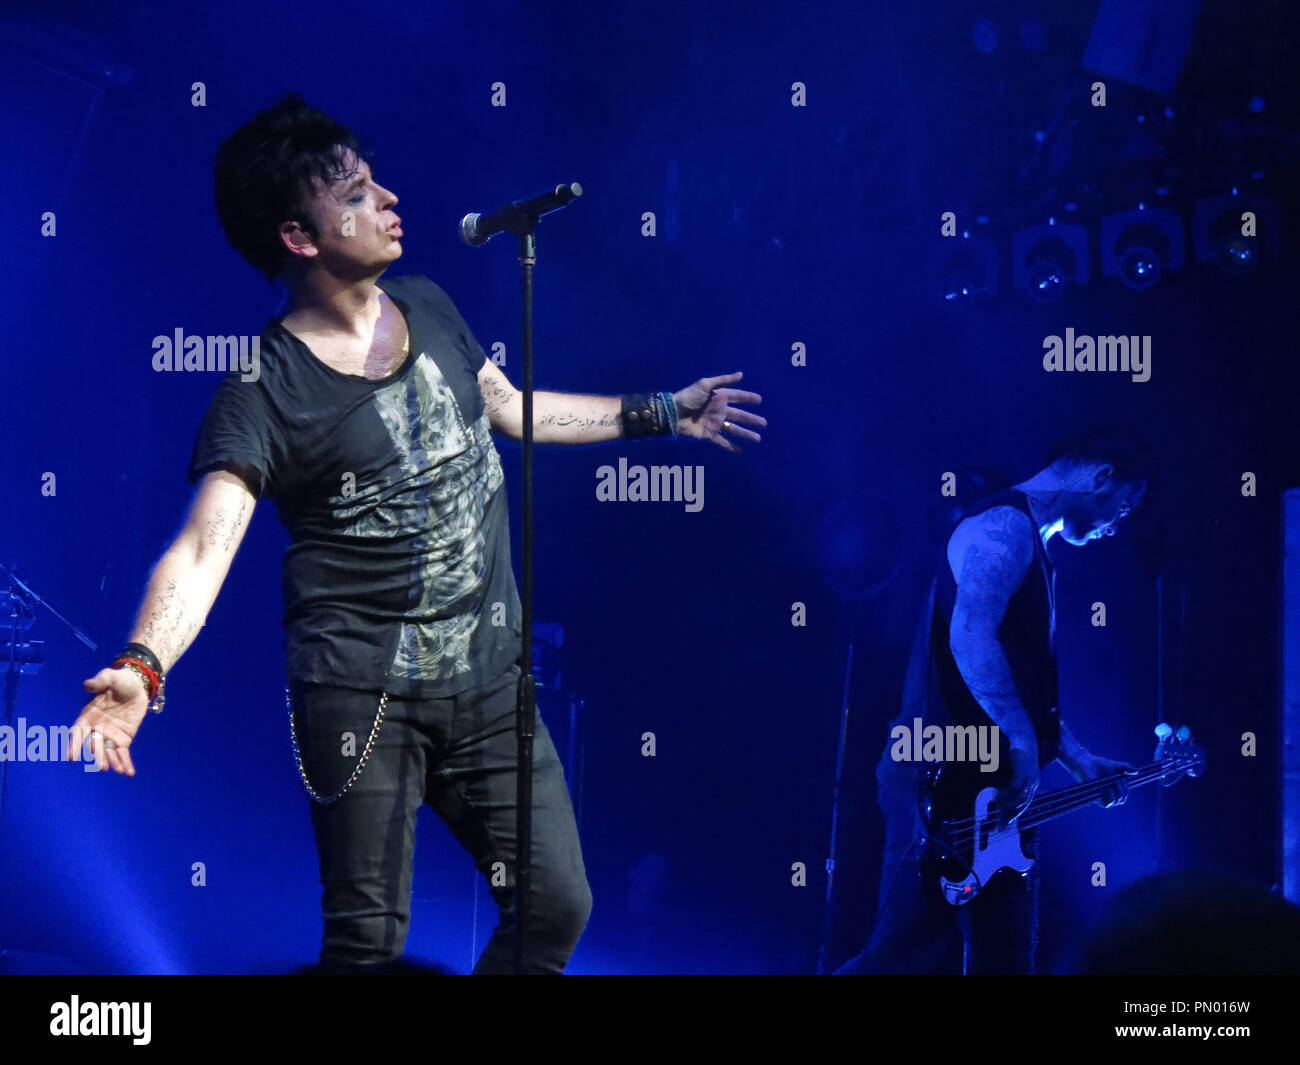 Gary Numan live at The Mayan Theatre in Los Angeles, CA, March 6, 2014. Photo by: Richard Chavez / PictureLux Stock Photo